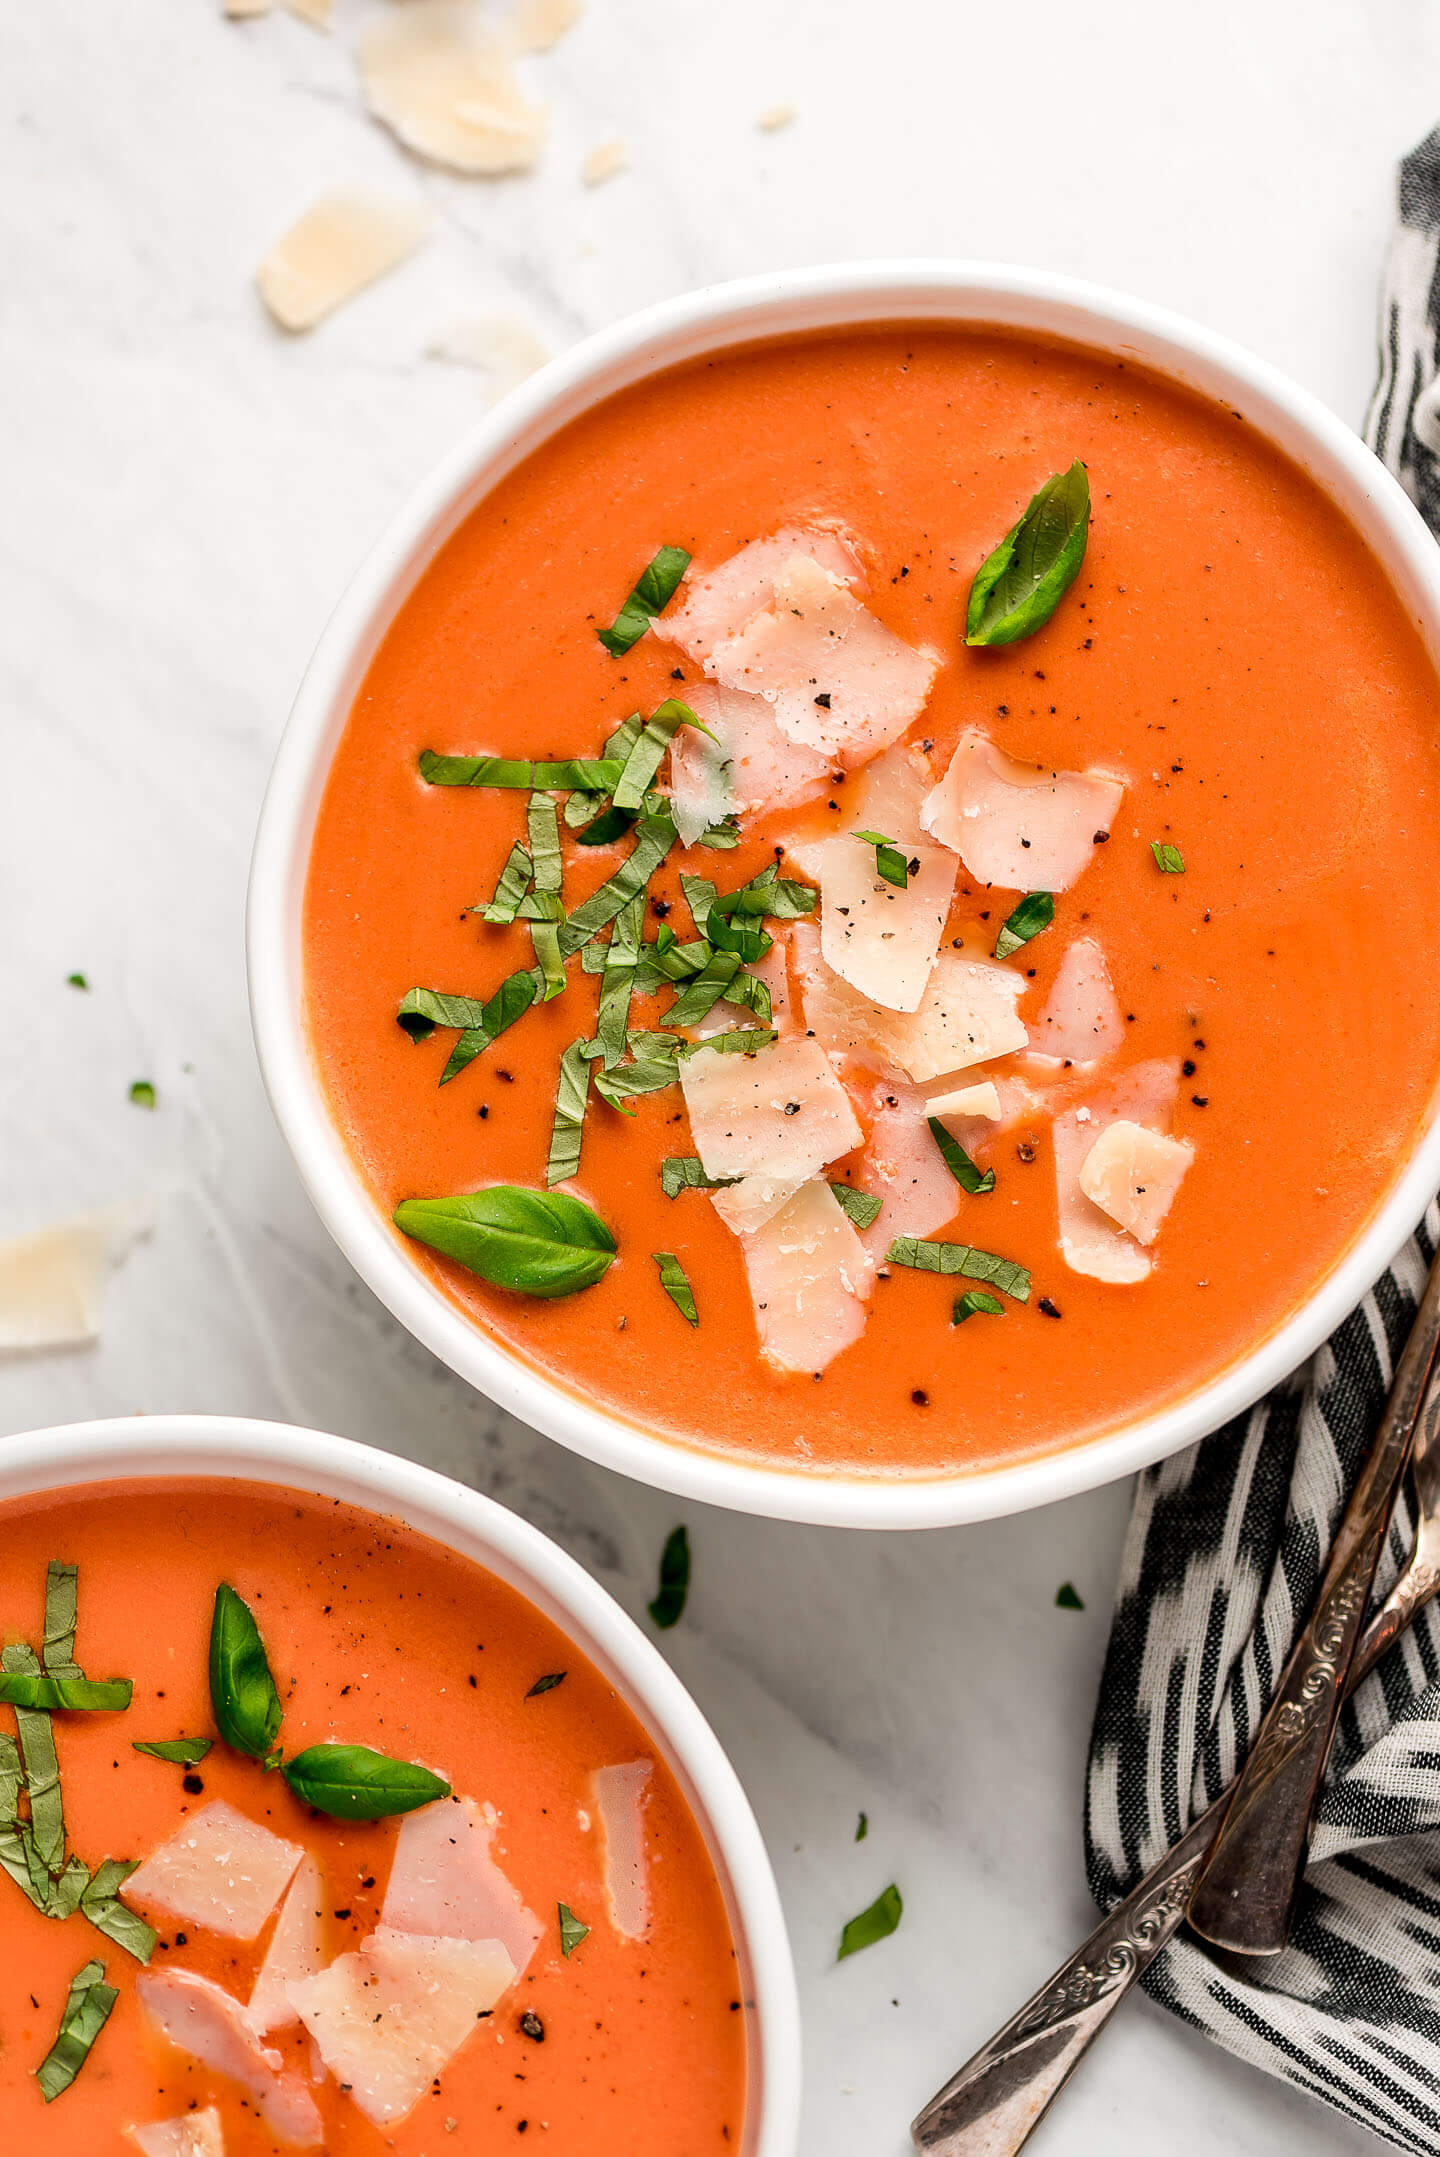 How to Make Blendtec Soup Recipes - Raw, Hot AND Chunky Soups!